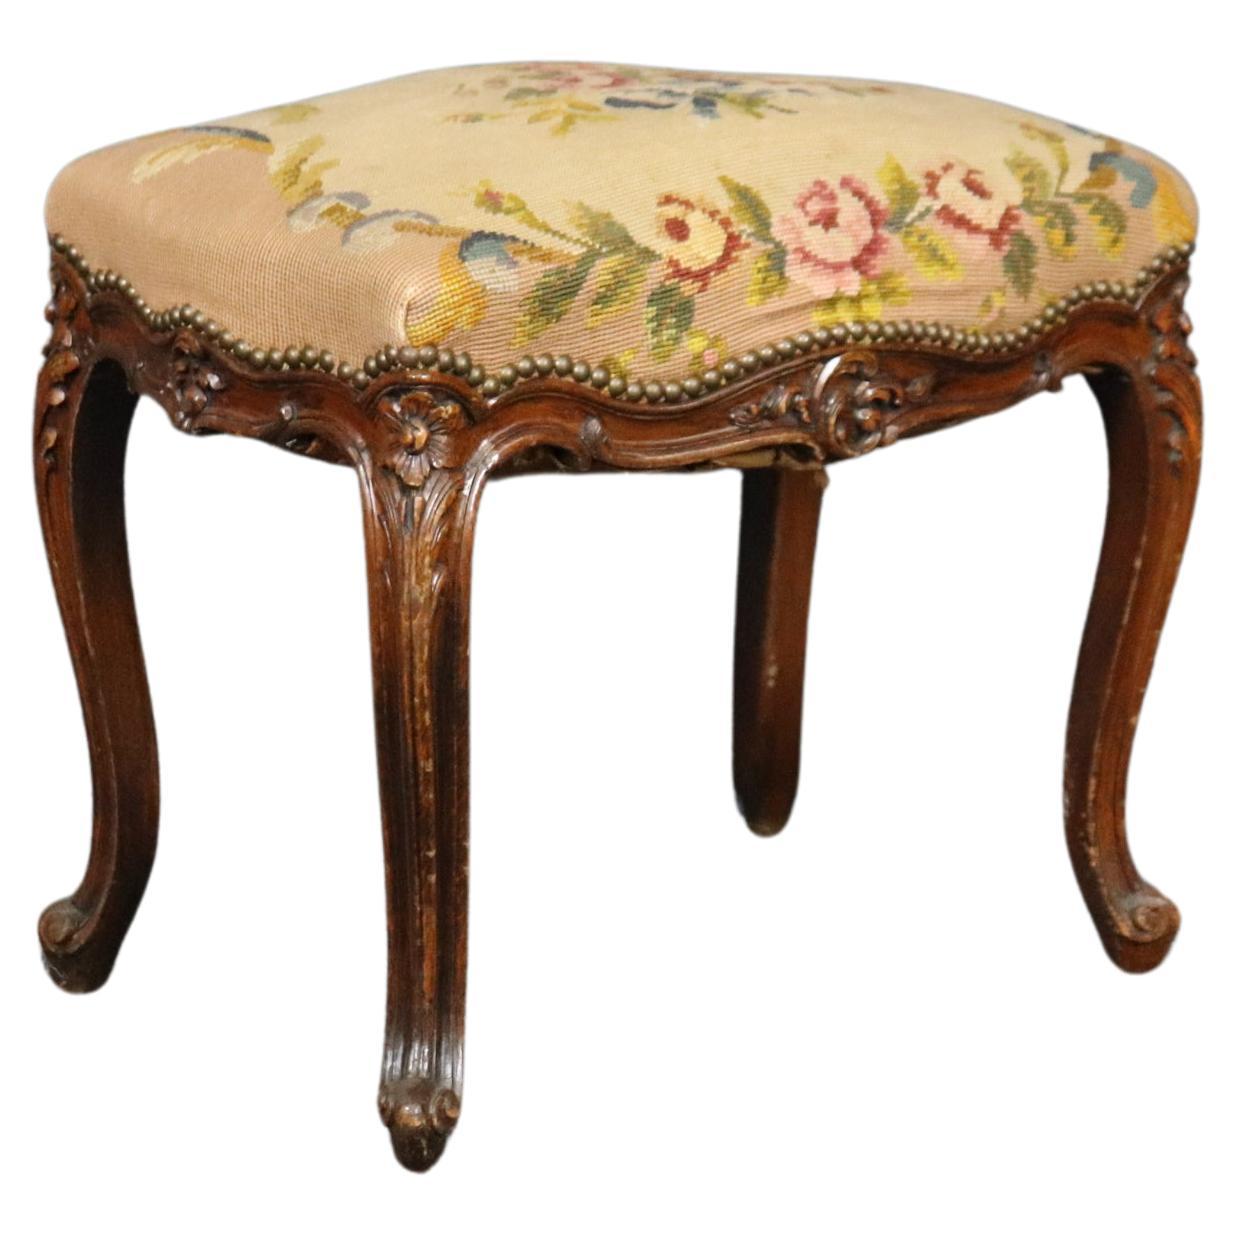 French Louis XV Carved Walnut Distressed Antique Needlepoint Upholstered Stool 